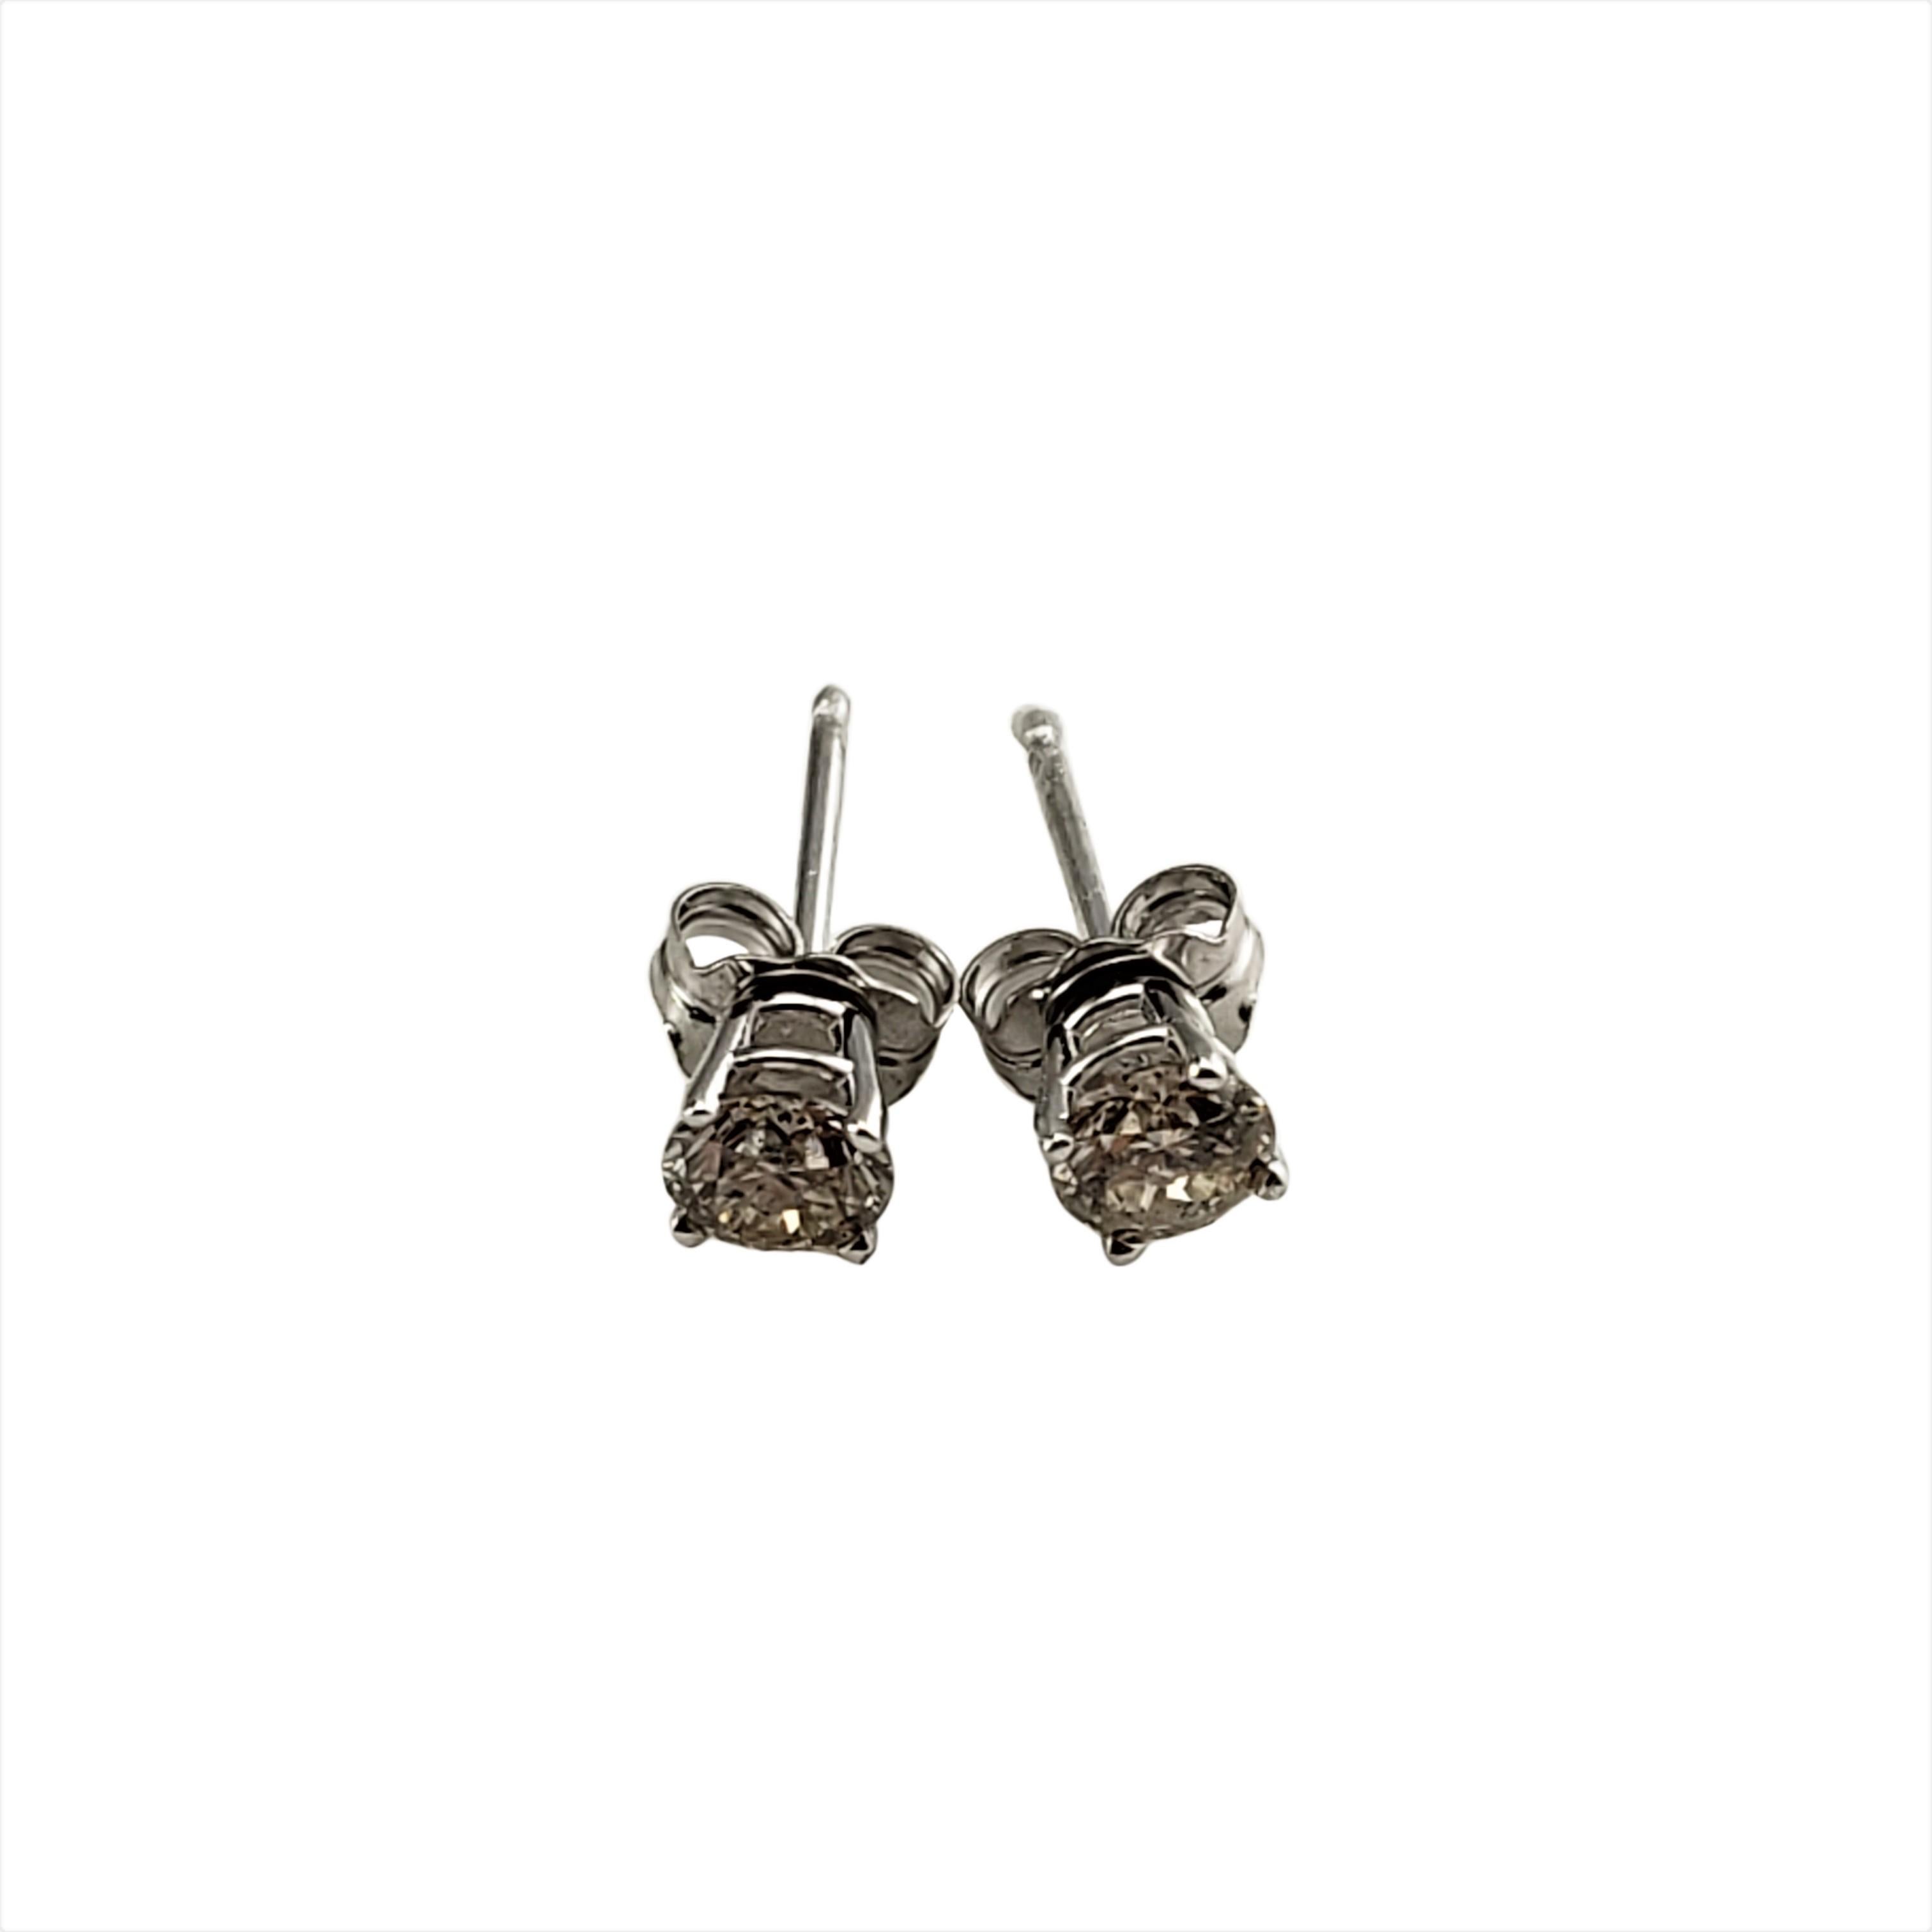 14 Karat White Gold Diamond Stud Earrings .50 tcw.-

These sparkling stud earrings each feature one round brilliant cut diamond set in classic 14K white gold.  Push back closures.

Approximate total diamond weight:  .50 ct.

Diamond color: 